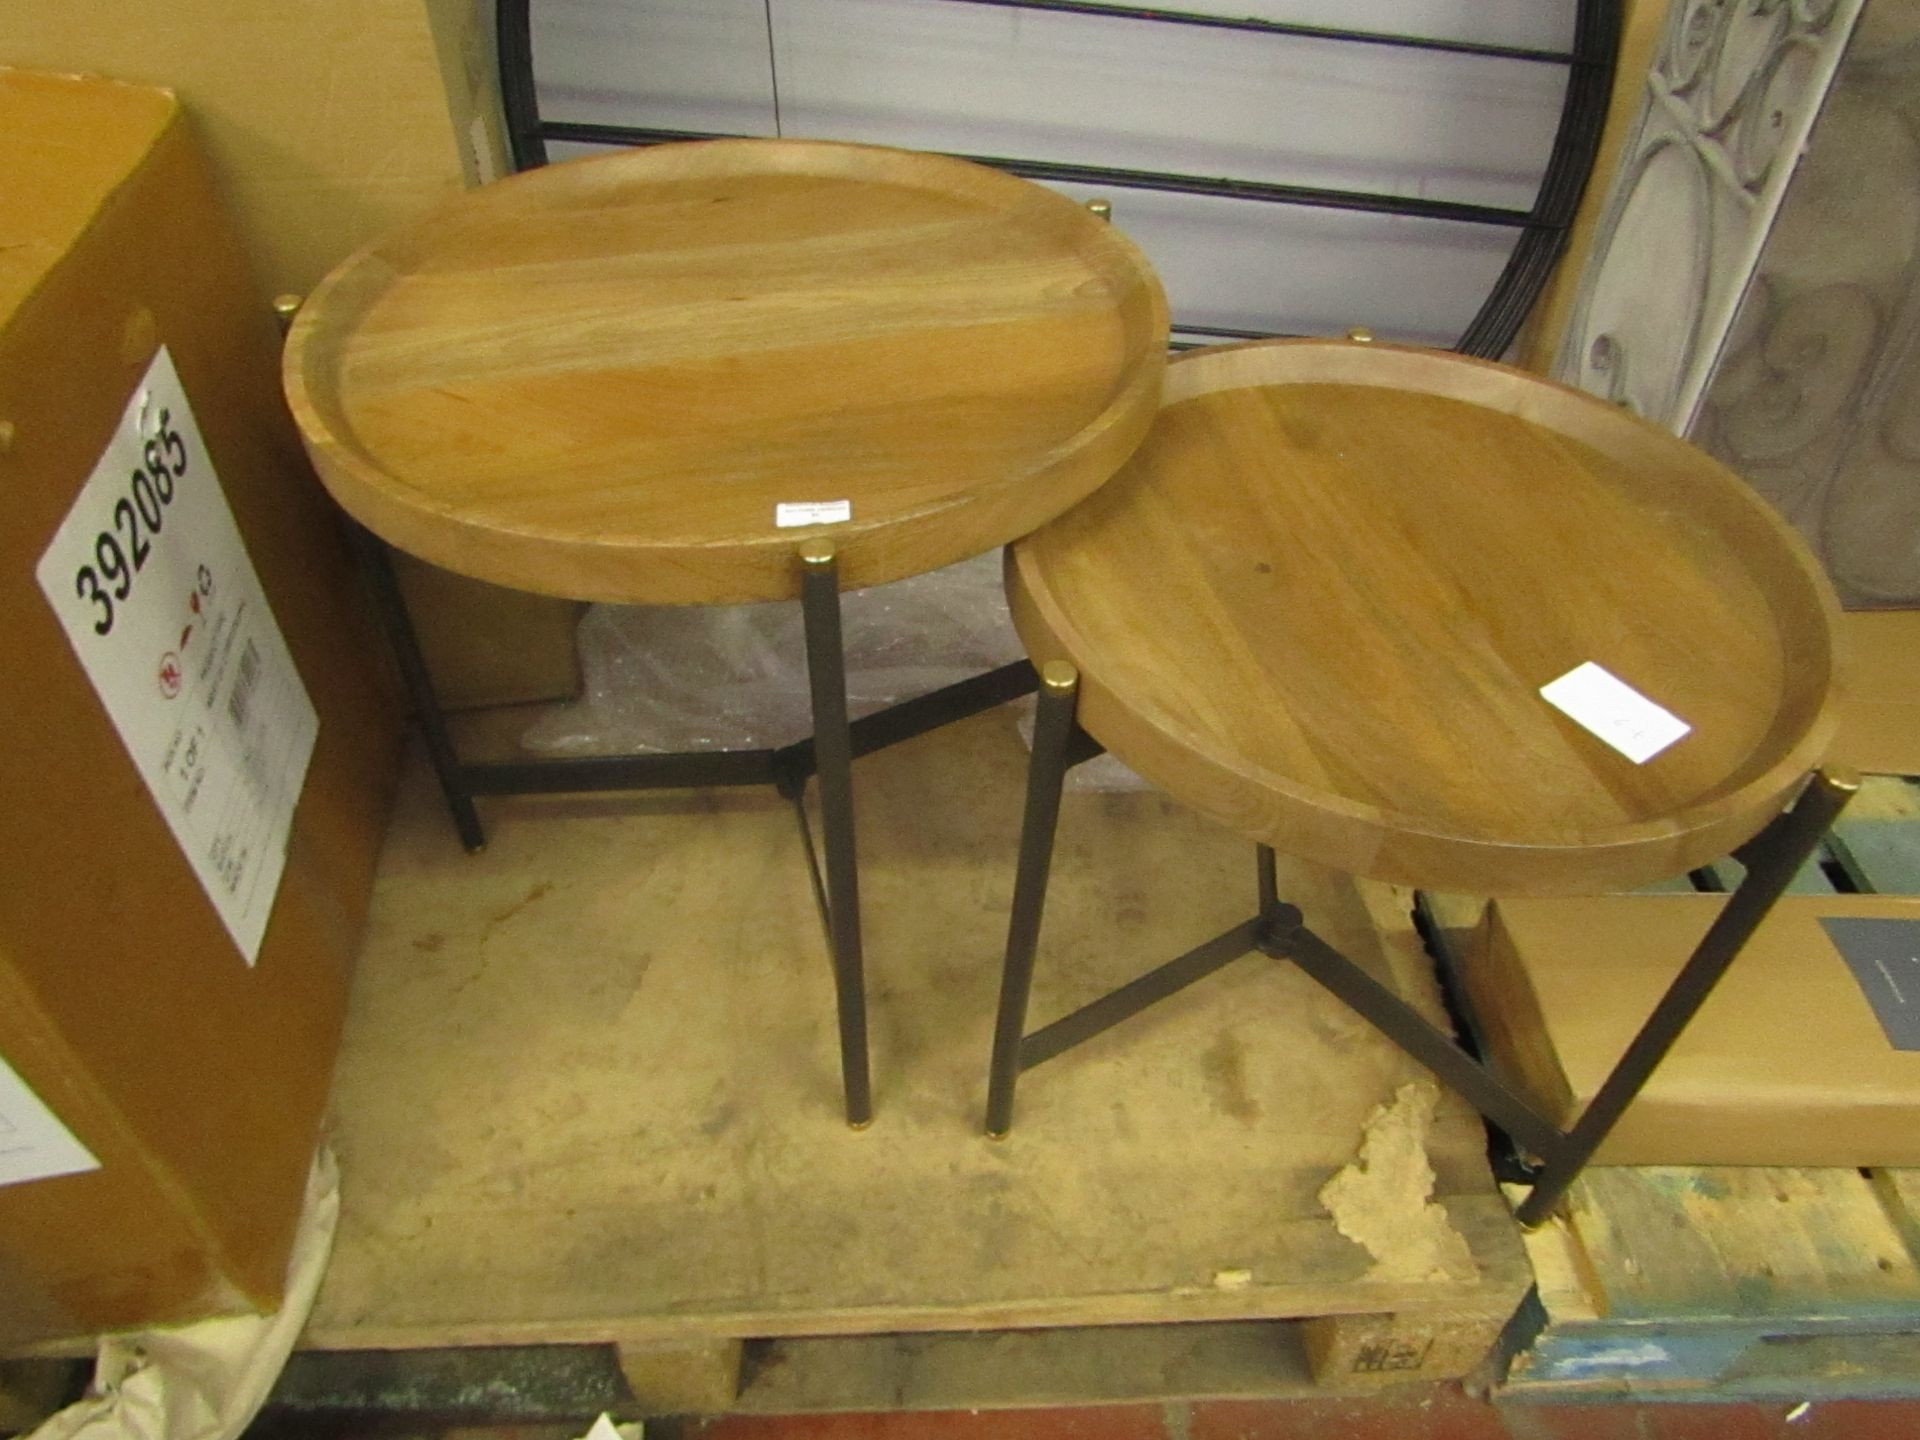 1 x Cox & Cox Two Arbour Nesting Tables RRP £375.00 SKU COX-1228675 TOTAL RRP £375 This lot is a